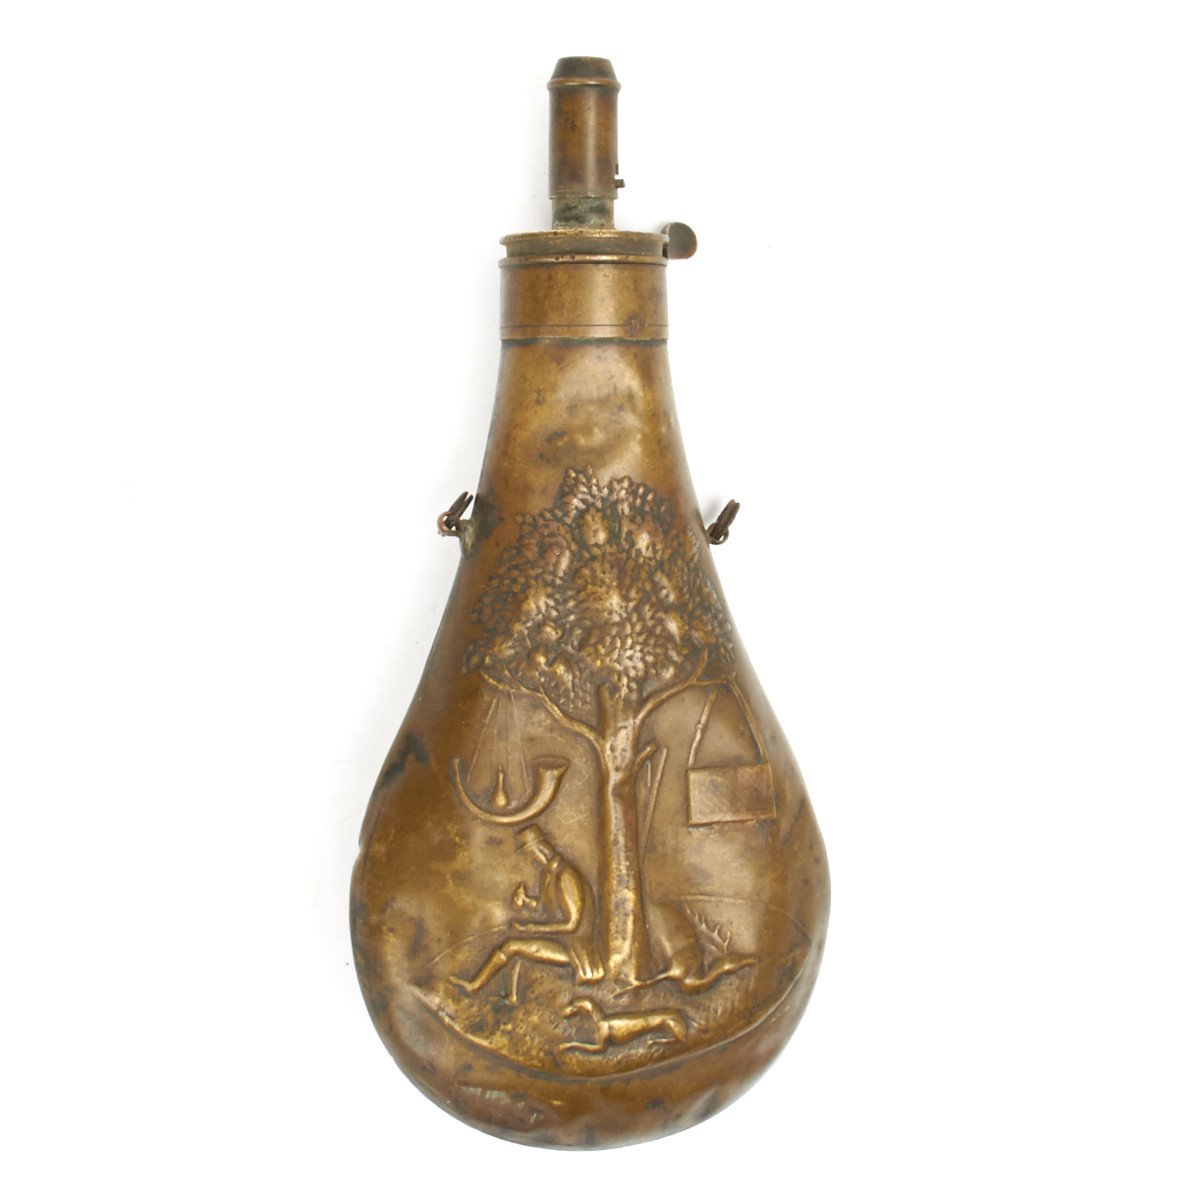 Farmhouse Antique Brass Embossed Powder or Shot Flask